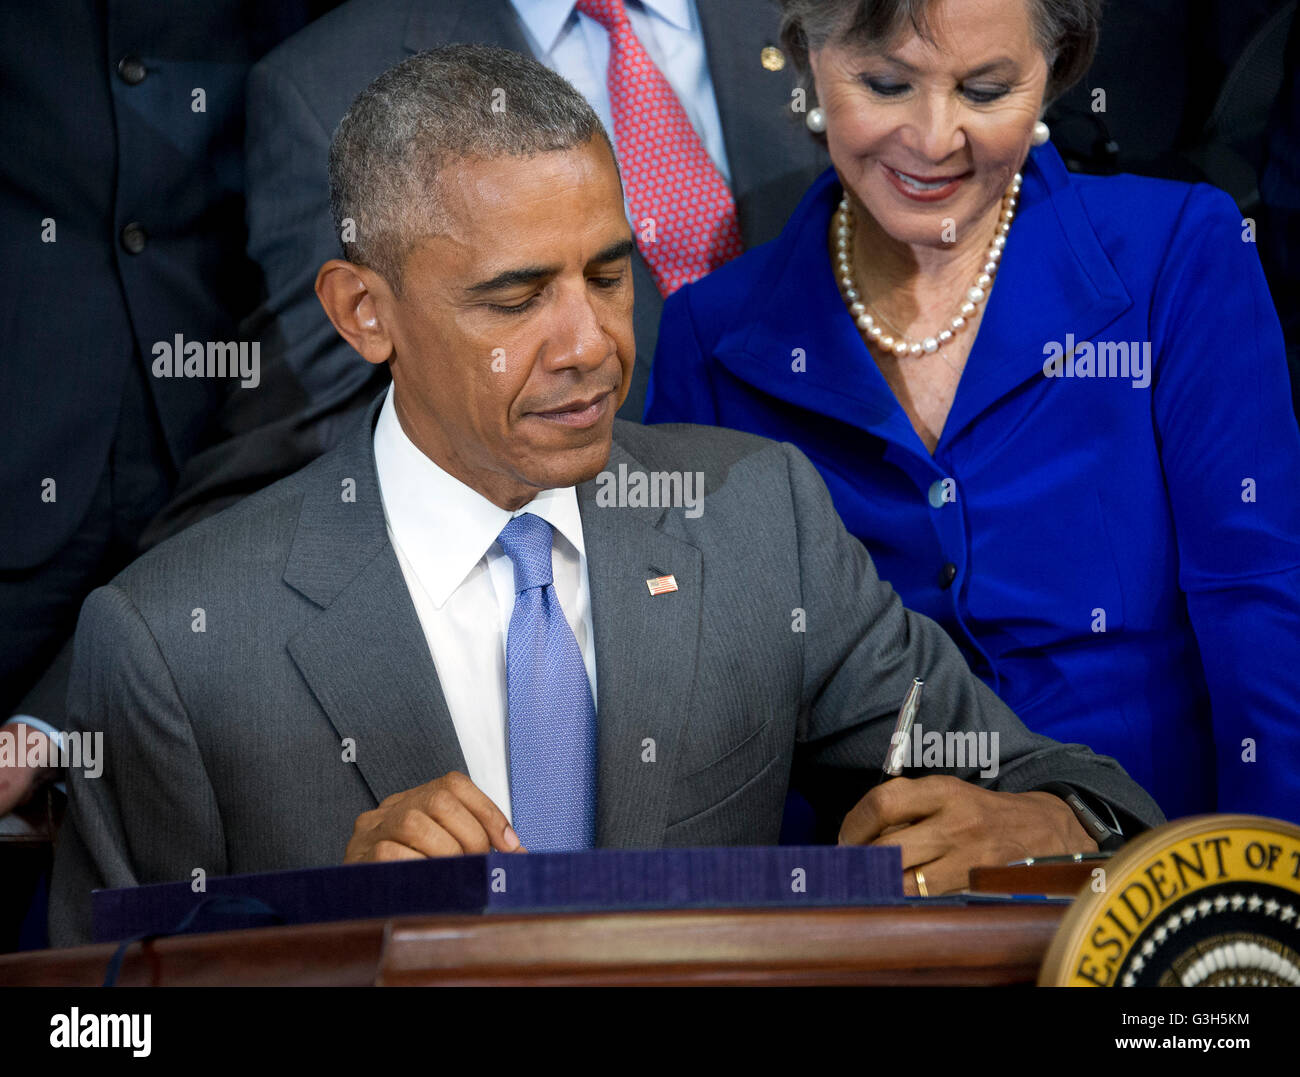 Certain Toxic Chemicals Used Regularly. 22nd June, 2016. United States President Barack Obama signs H.R. 2576, the Frank R. Lautenberg Chemical Safety for the 21st Century Act in the South Court Auditorium of the White House in Washington, DC on Wednesday, June 22, 2016. The bill will establish standards for the use of certain toxic chemicals used regularly. US Senator Barbara Boxer (Democrat of California) looks on from the right. Credit: Ron Sachs/CNP - NO WIRE SERVICE - © dpa/Alamy Live News Stock Photo